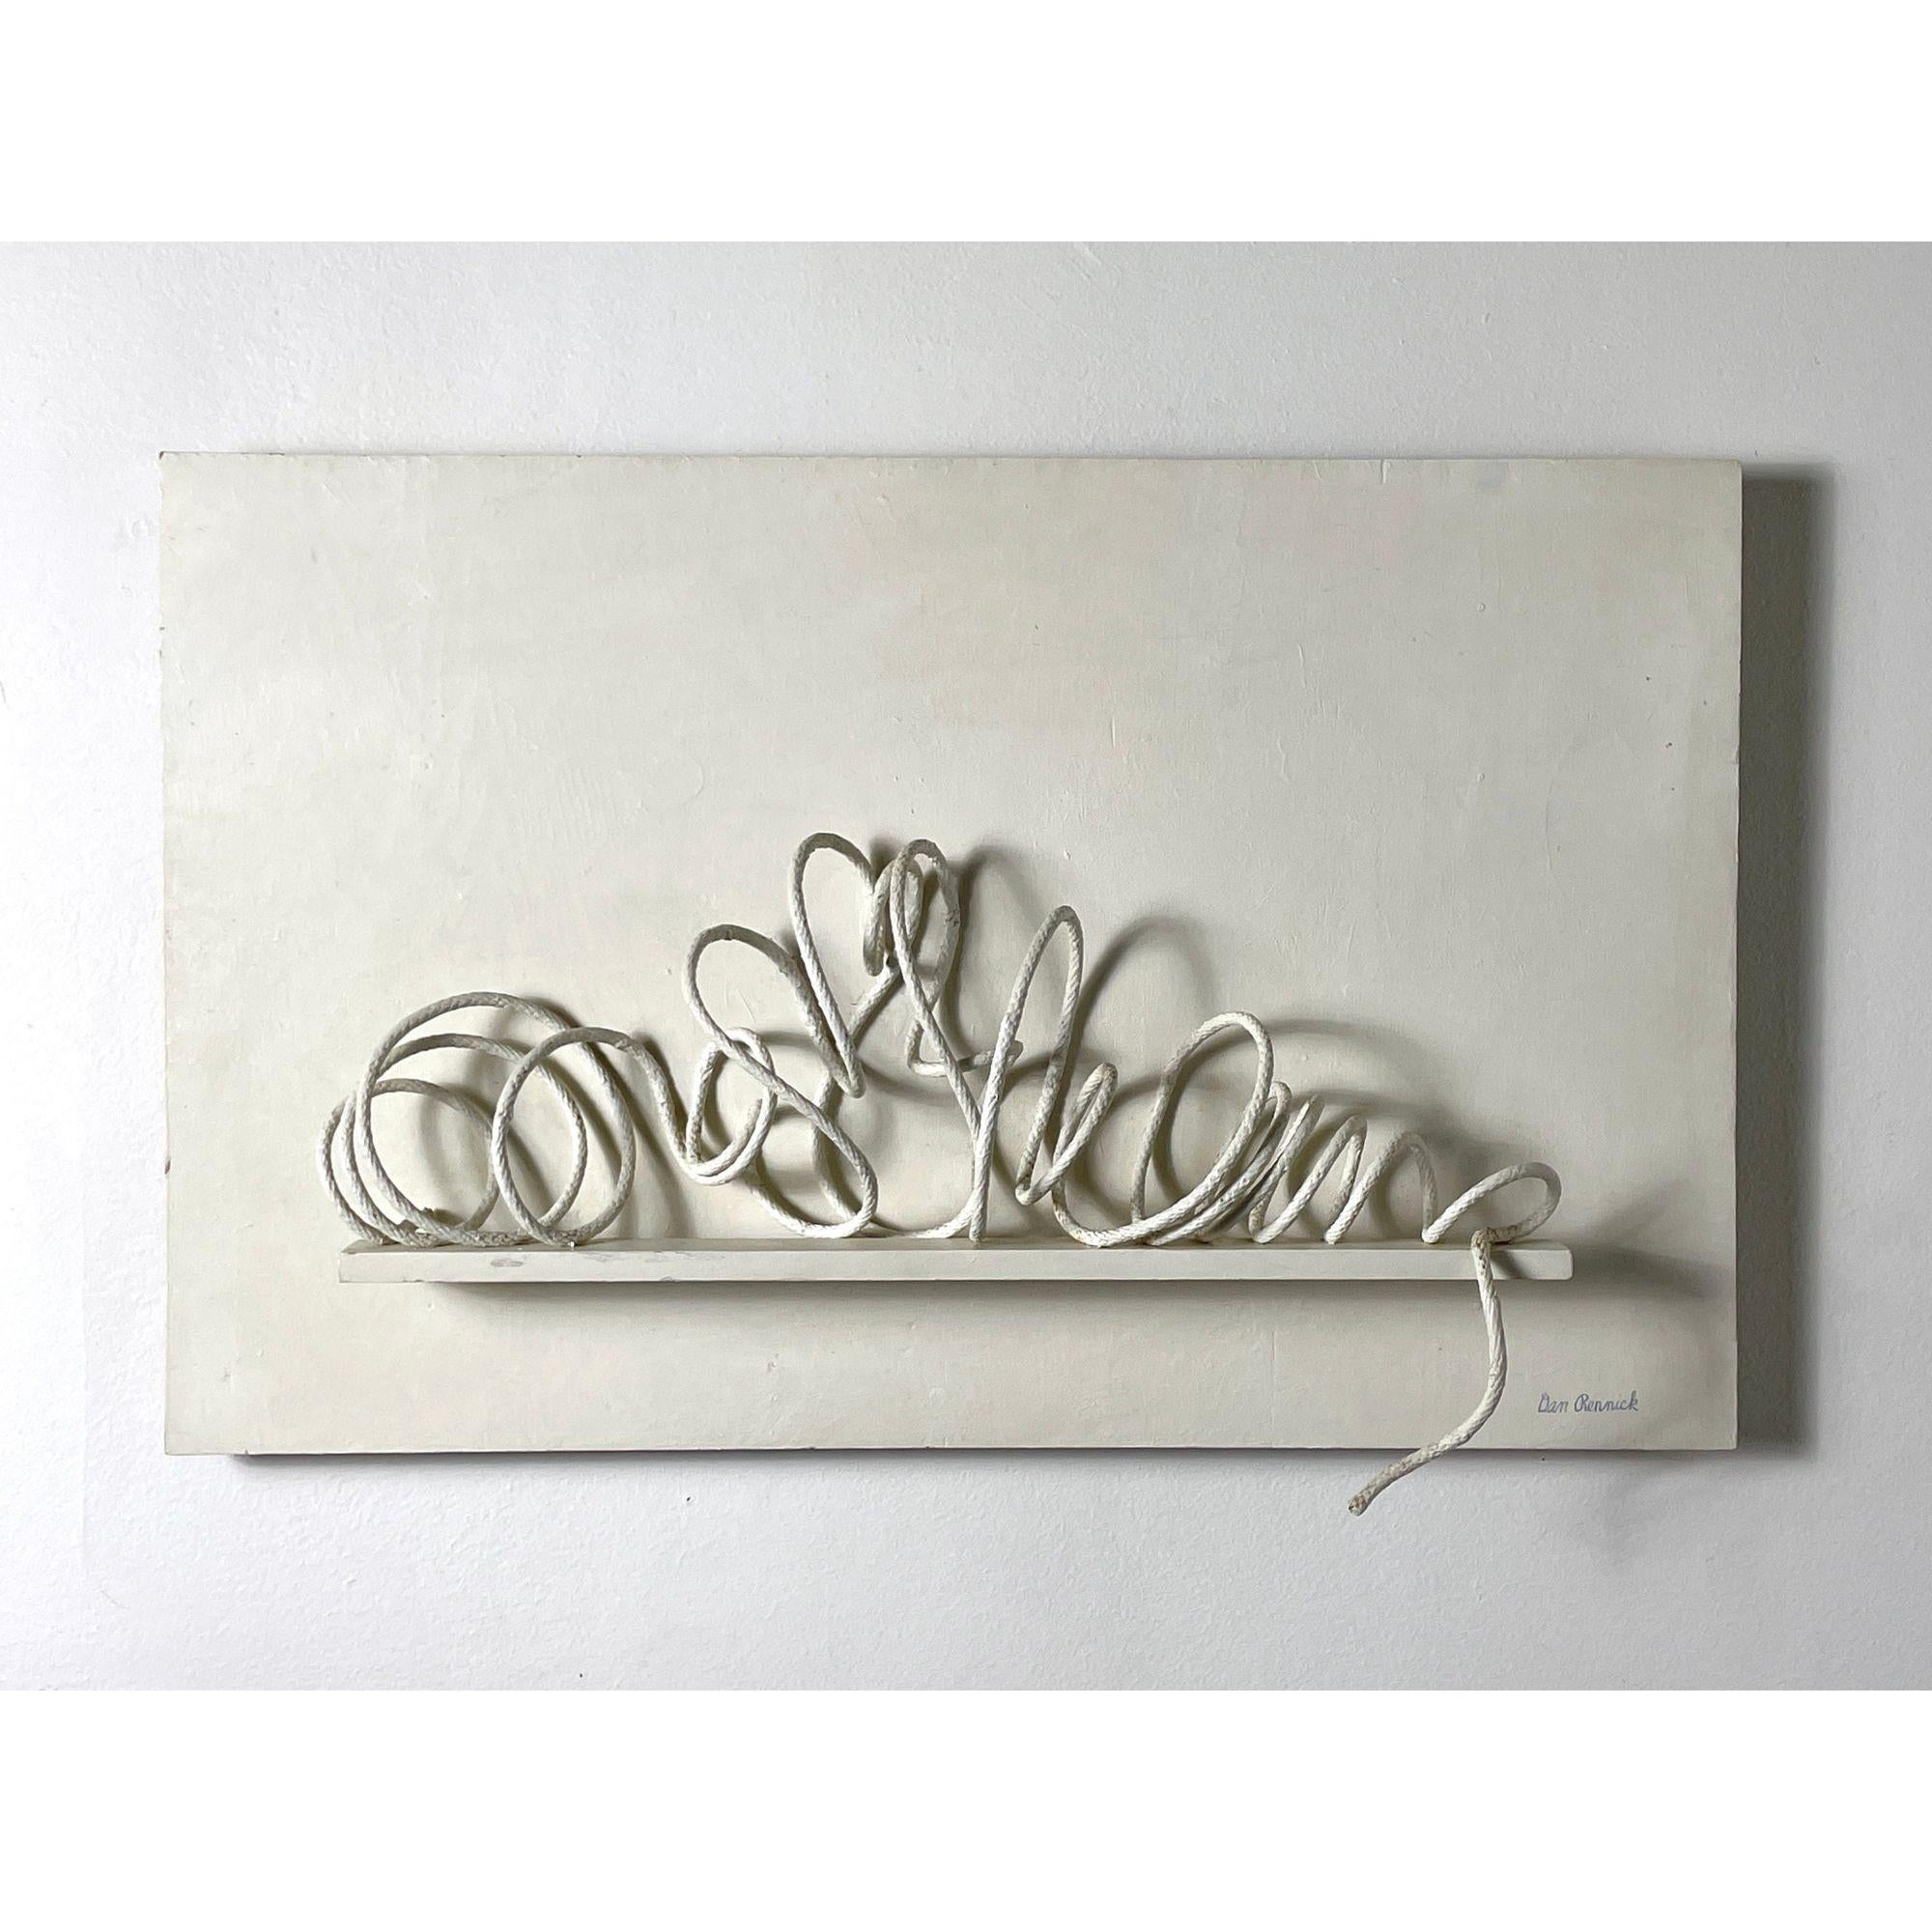 28x18 Dan Rennick Mixed Media Wall Art Sculpture 1970s

Modernist assemblage titled Round and Round by Dan Rennick 1971
Monochromatic mixed media with coiled rope rested on a wooden ledge
Signed lower right and on verso

Additional